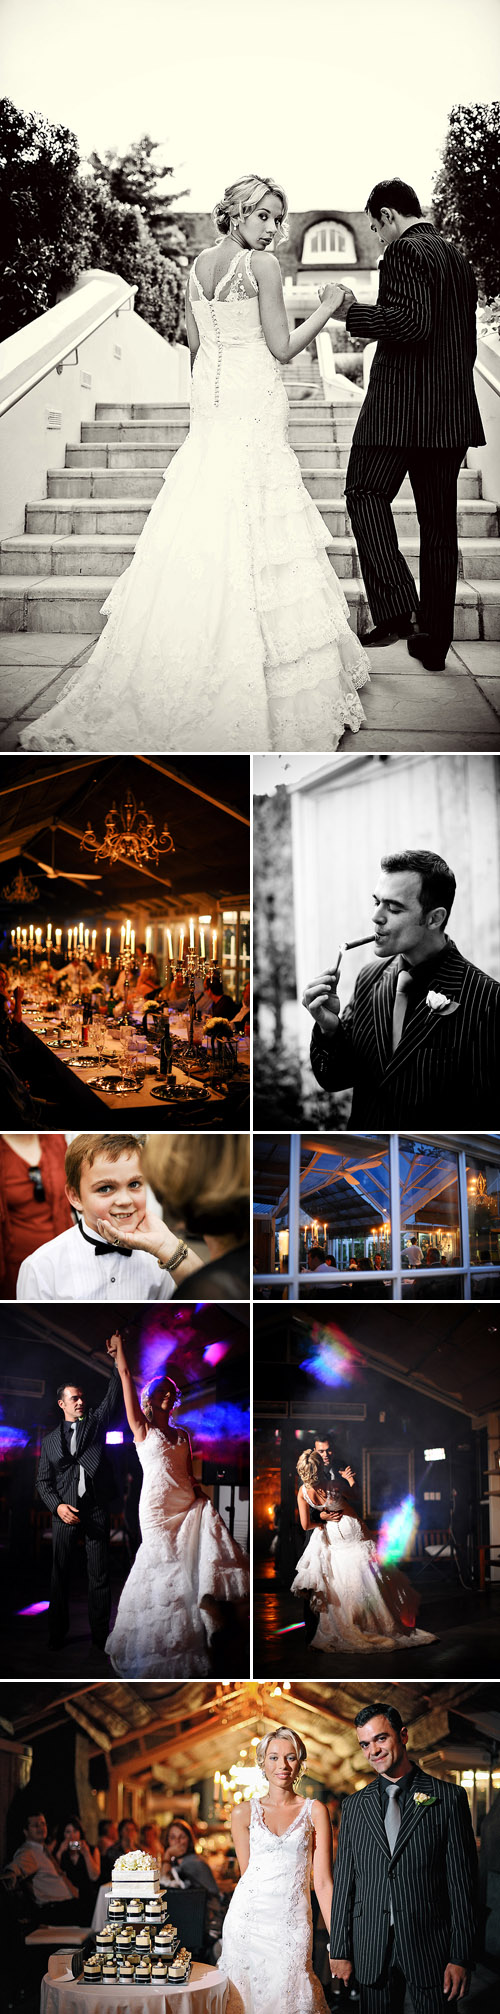 glamorous south african real wedding reception, black, white, gray and silver wedding color palette, images by Eric Uys